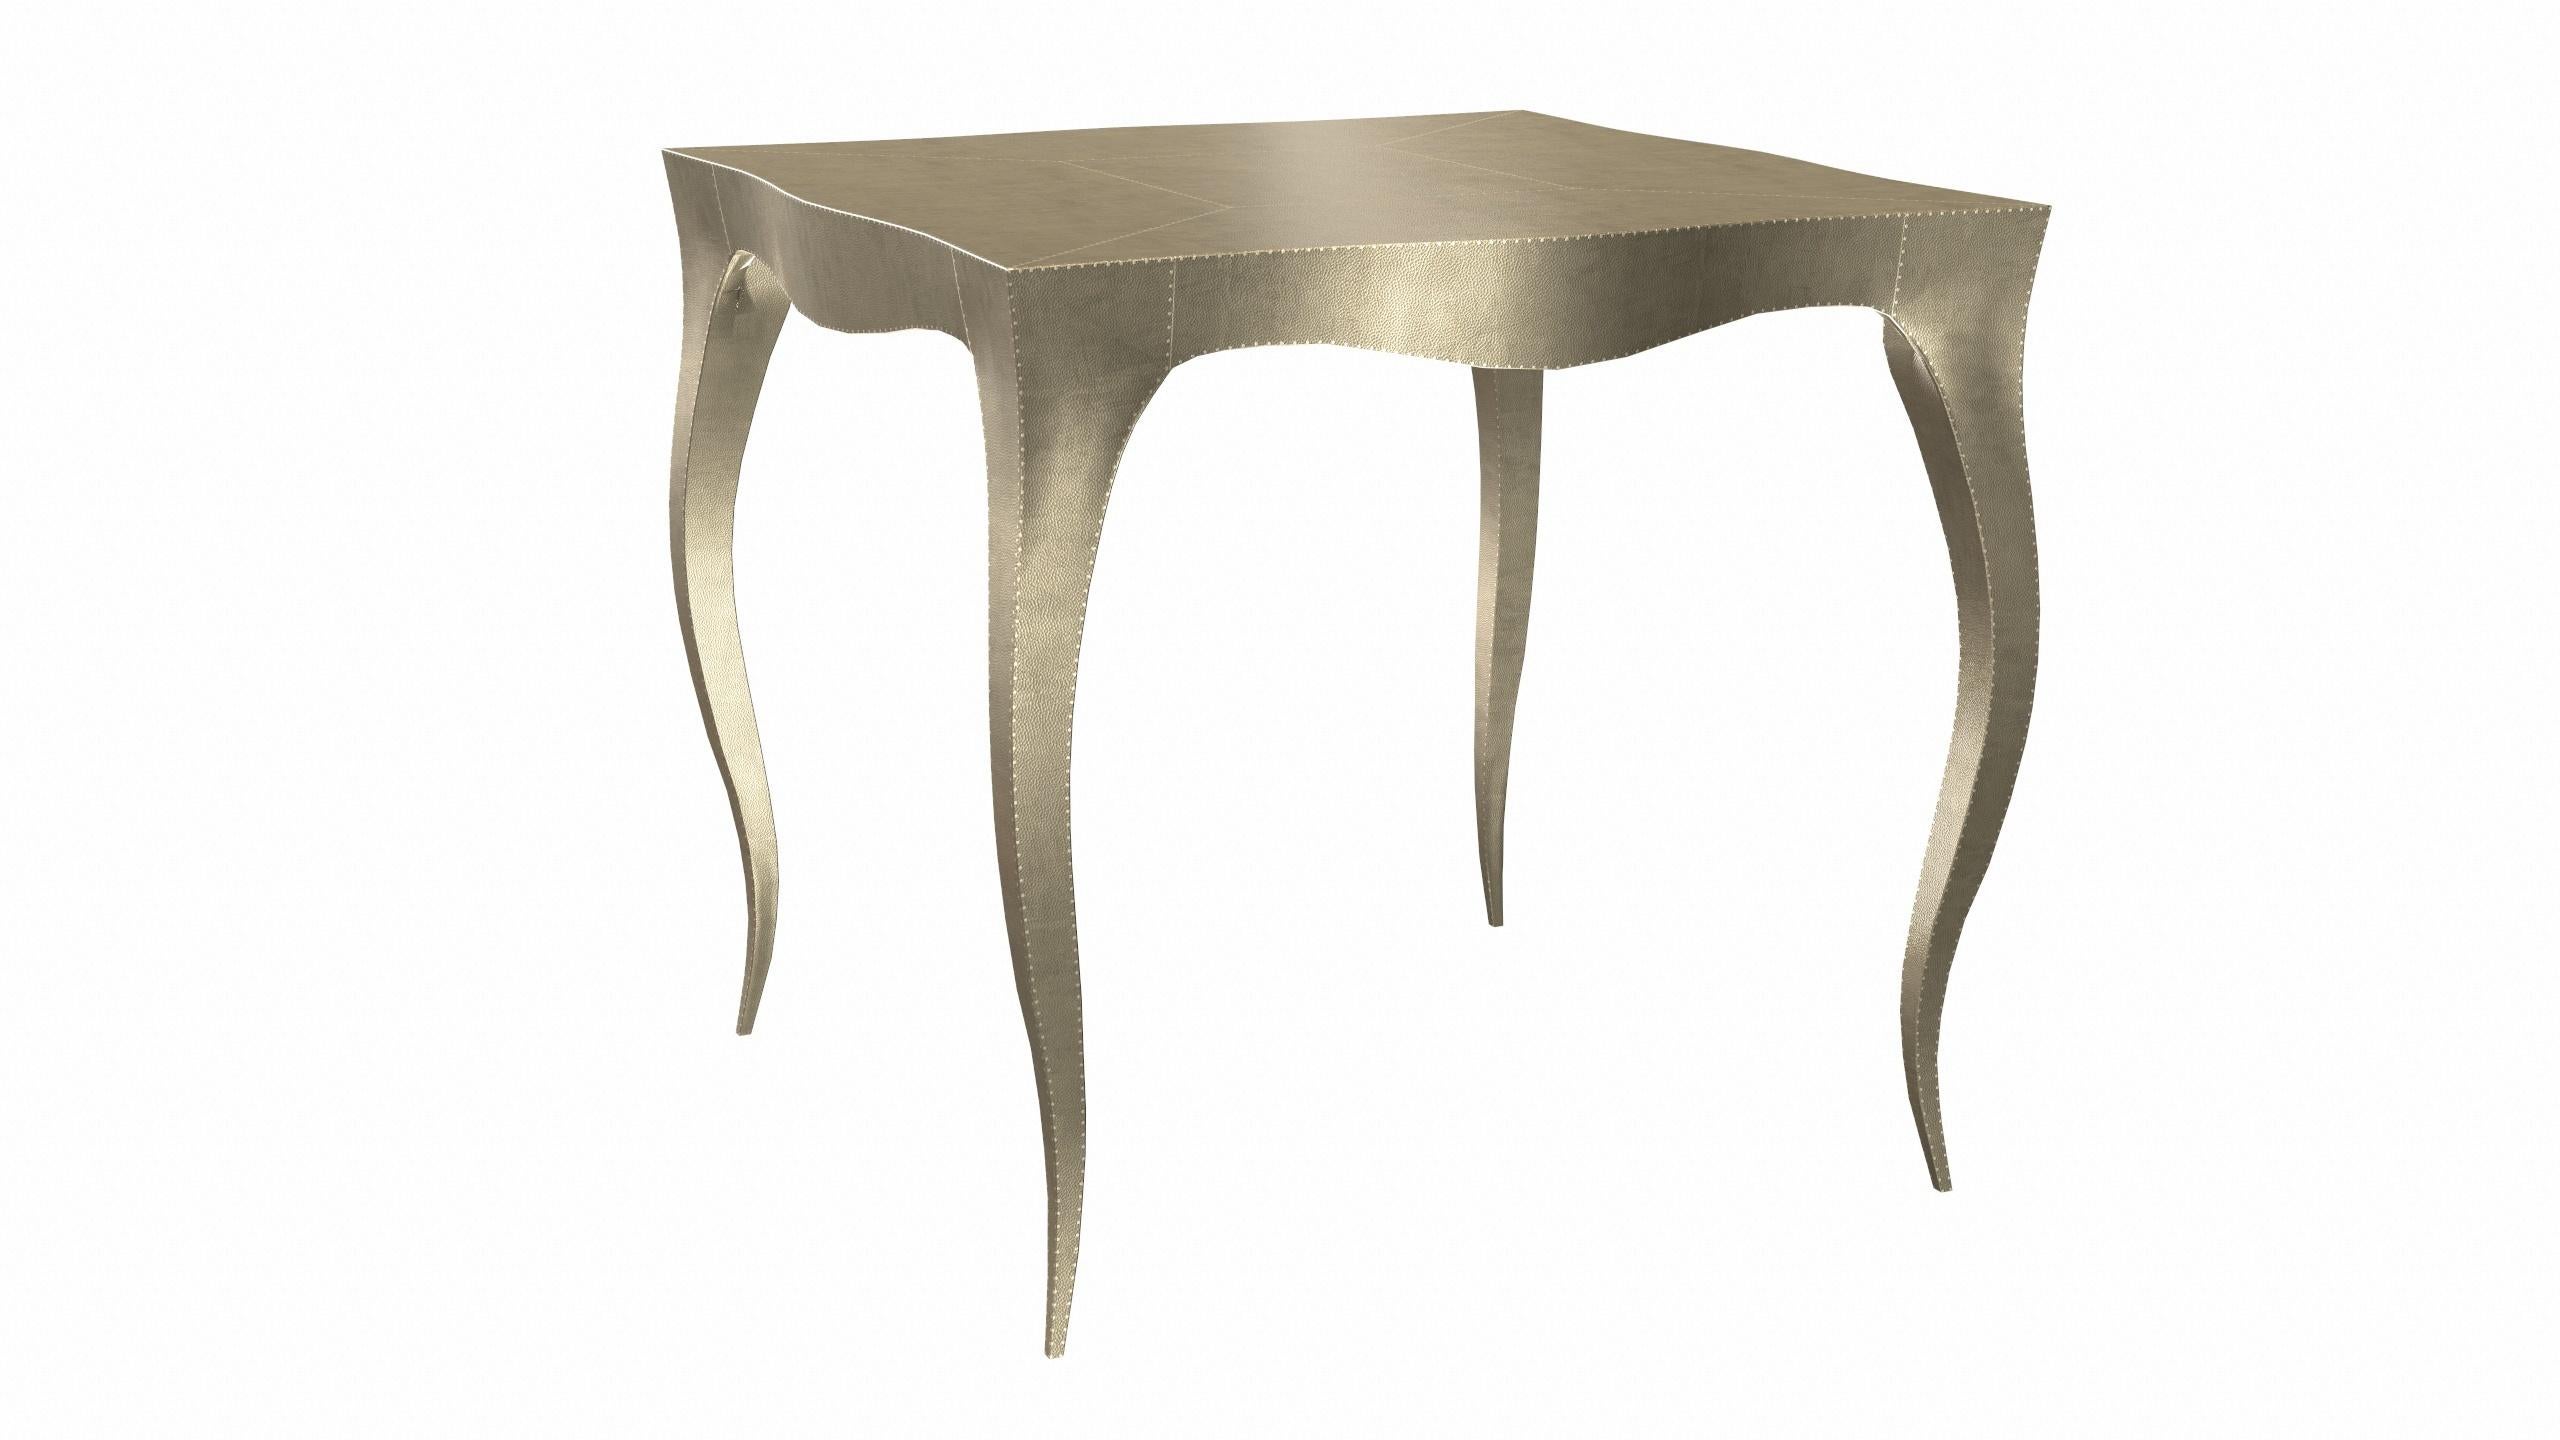 Louis Card Tables from our Louise Collection. The renowned designer Paul Mathieu chose the name “Louise” when he created his more feminine version of Louis XV (1730-1760) furniture. The characteristic cabriole leg, curving outward at the knee and